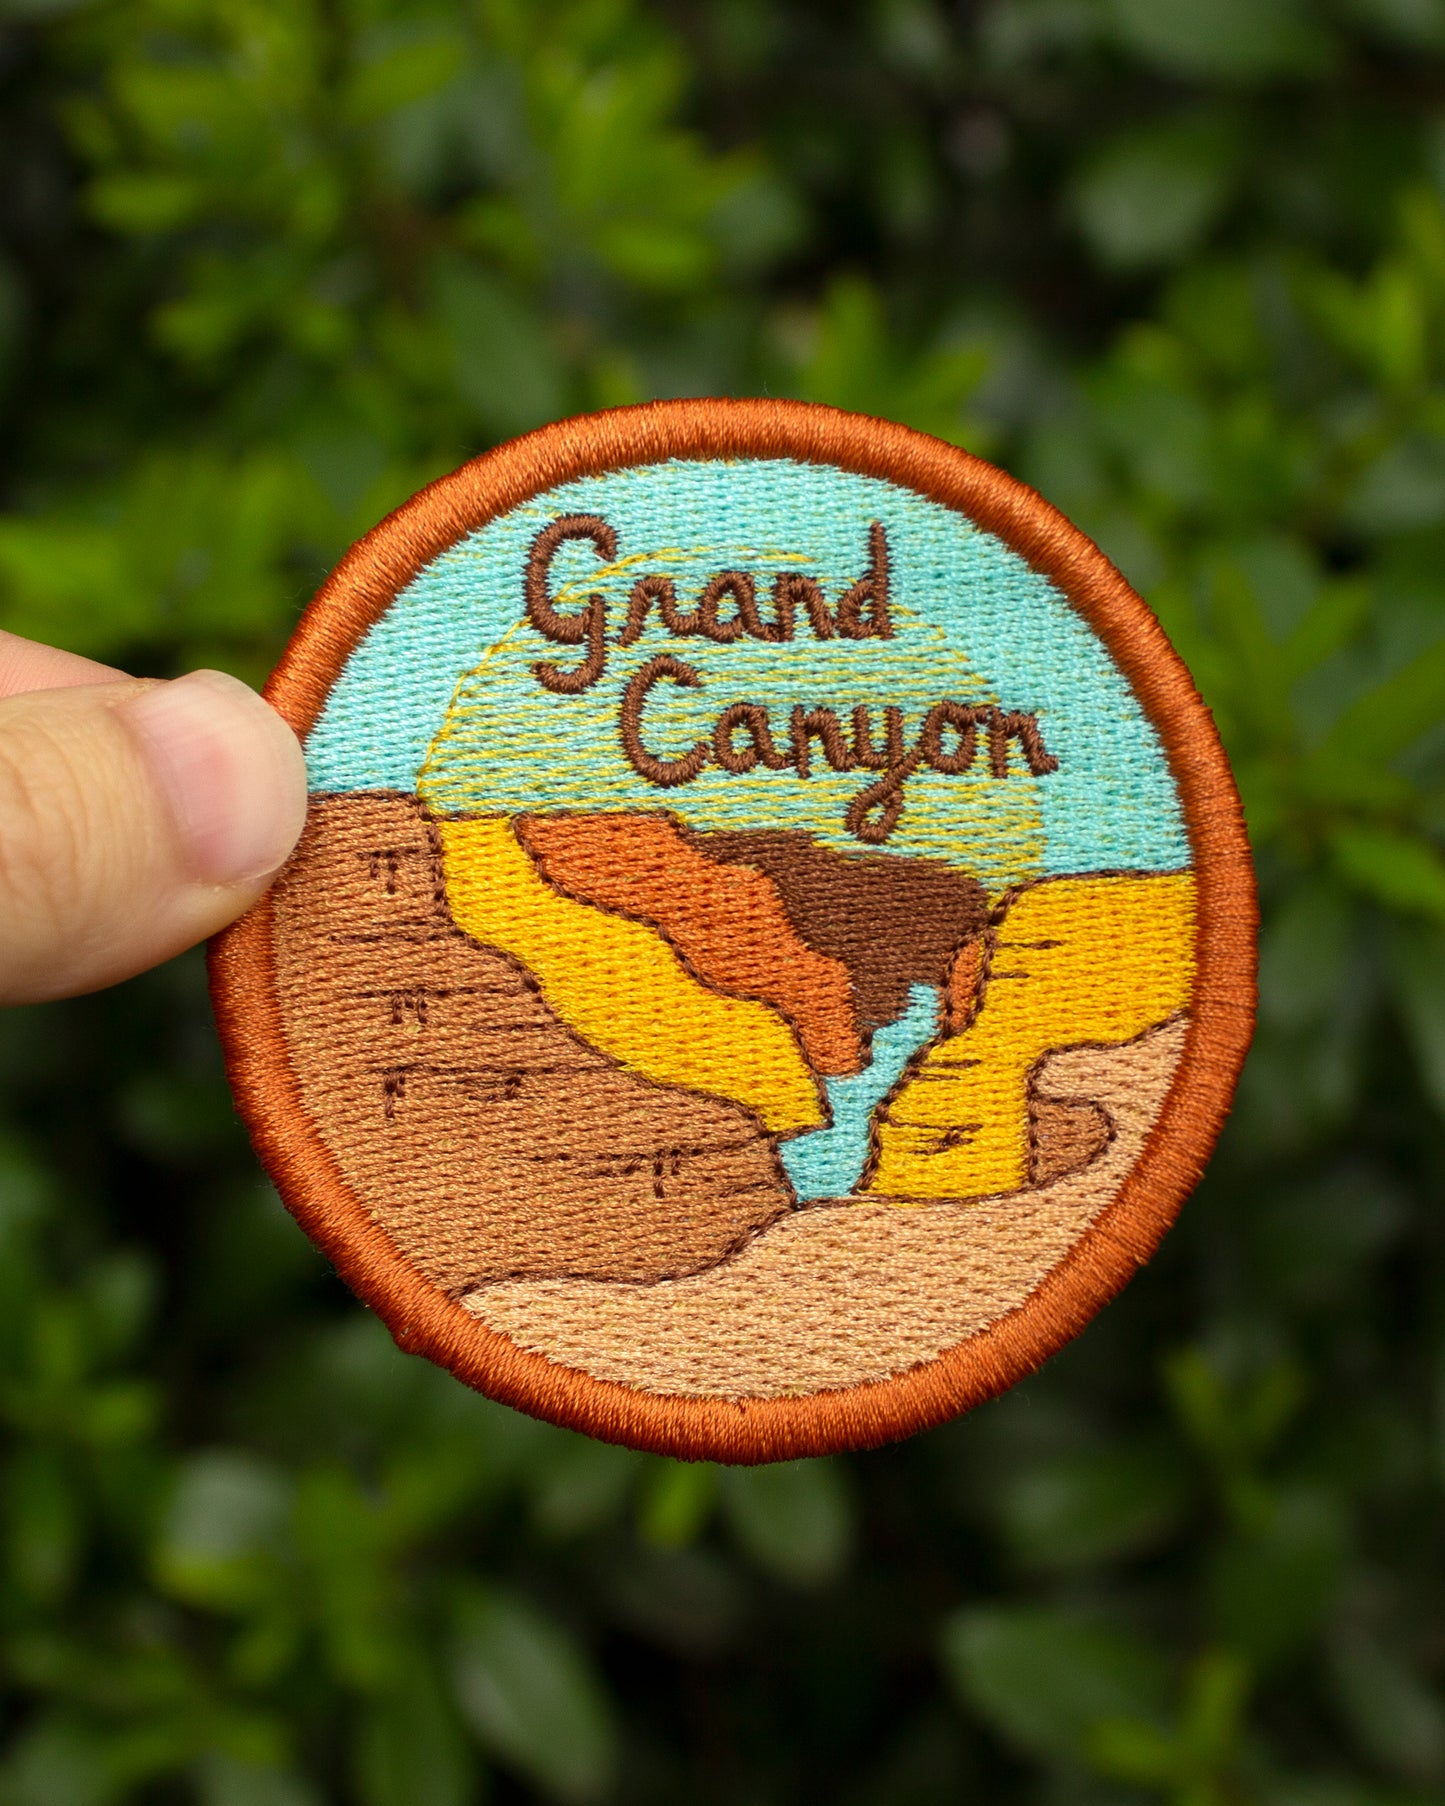 Grand Canyon Embroidered Patch